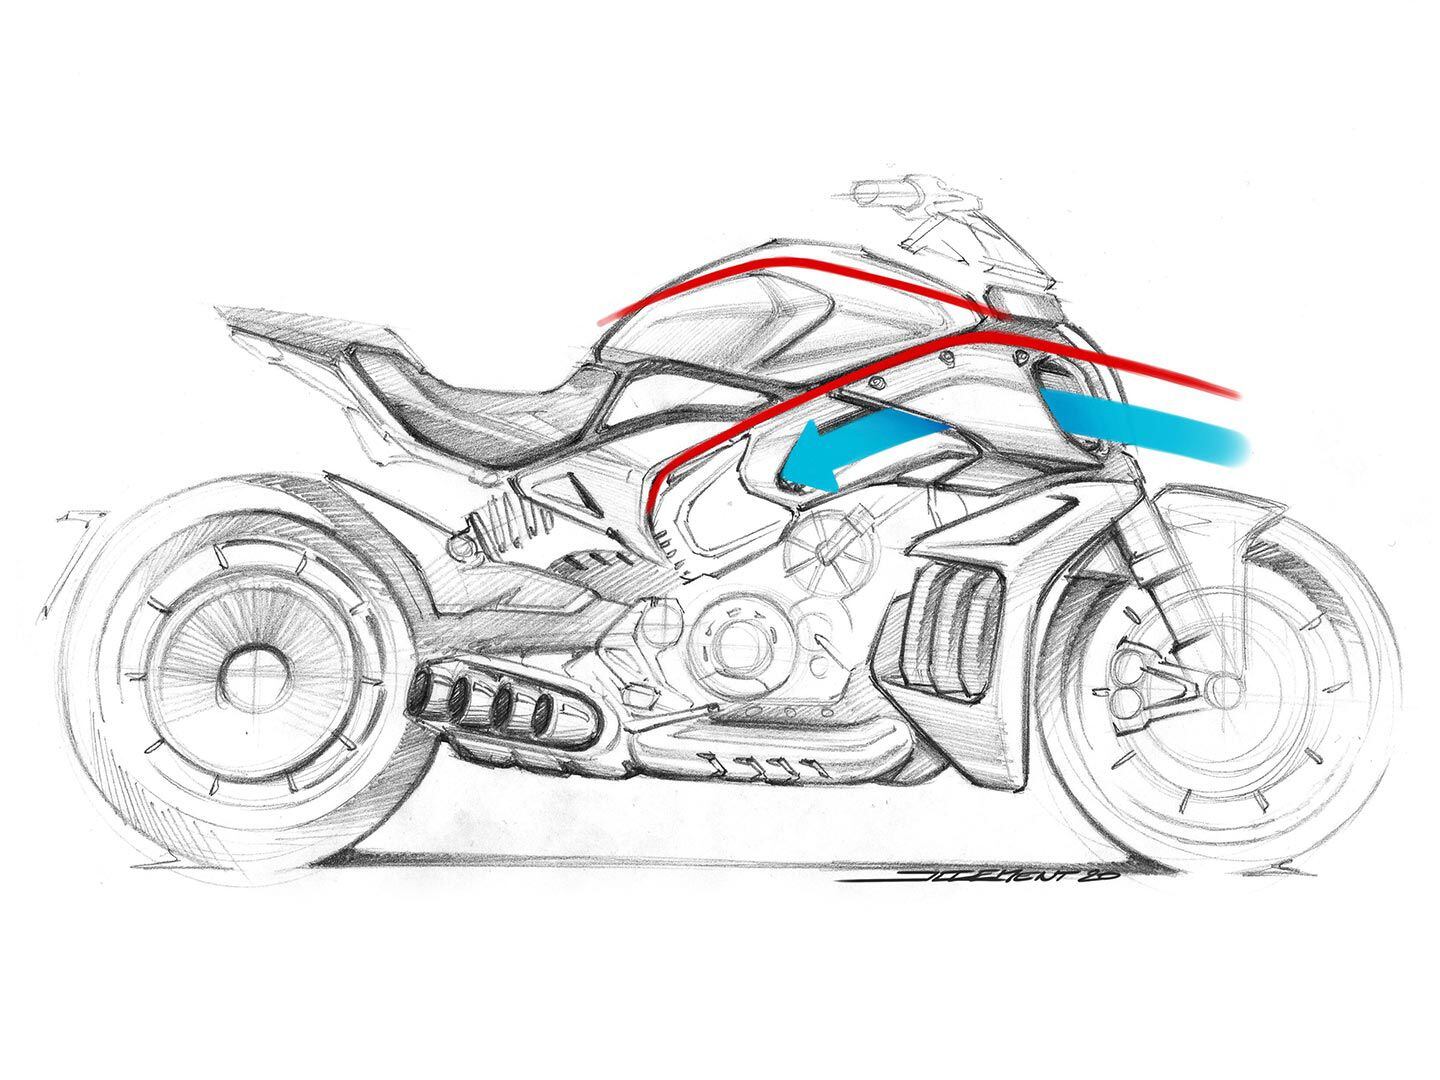 Julien Clément’s design sketch for the 2023 Ducati Diavel V4. Note how the exhaust and radiator shrouds differ from the final version.